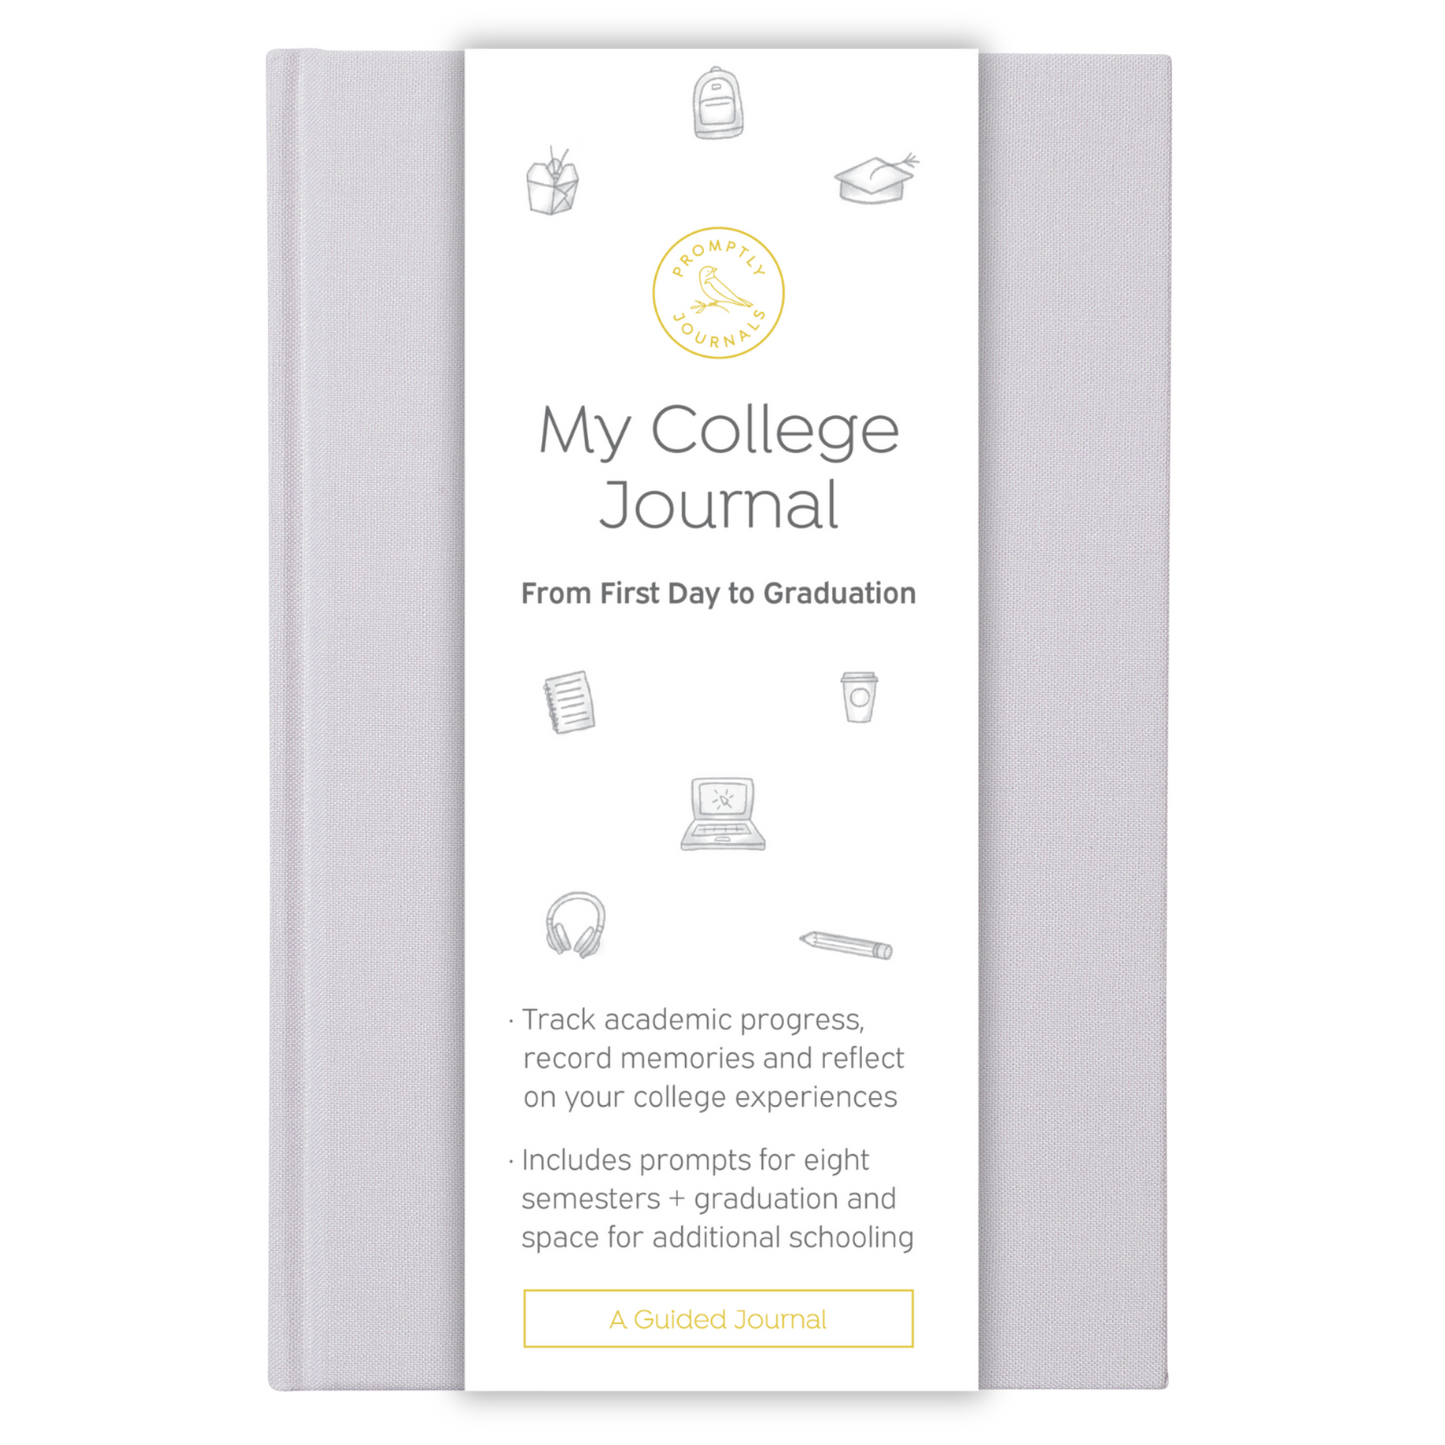 My College Journal: From First Day to Graduation (Lavender) by Promptly Journals